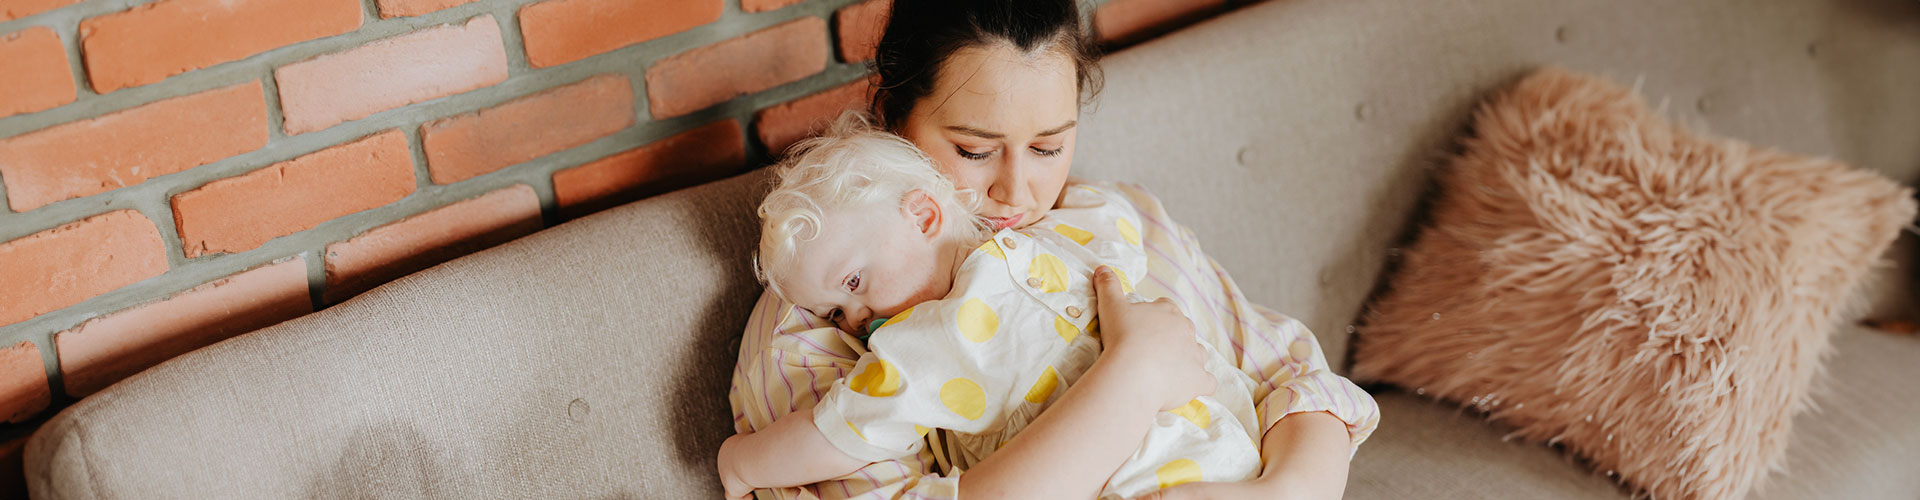 Photo of a mother holding her child affectionately while letting on a tired and worried expression. Our therapists offer counseling for Overwhelmed Moms in St. Louis, MO 63011.